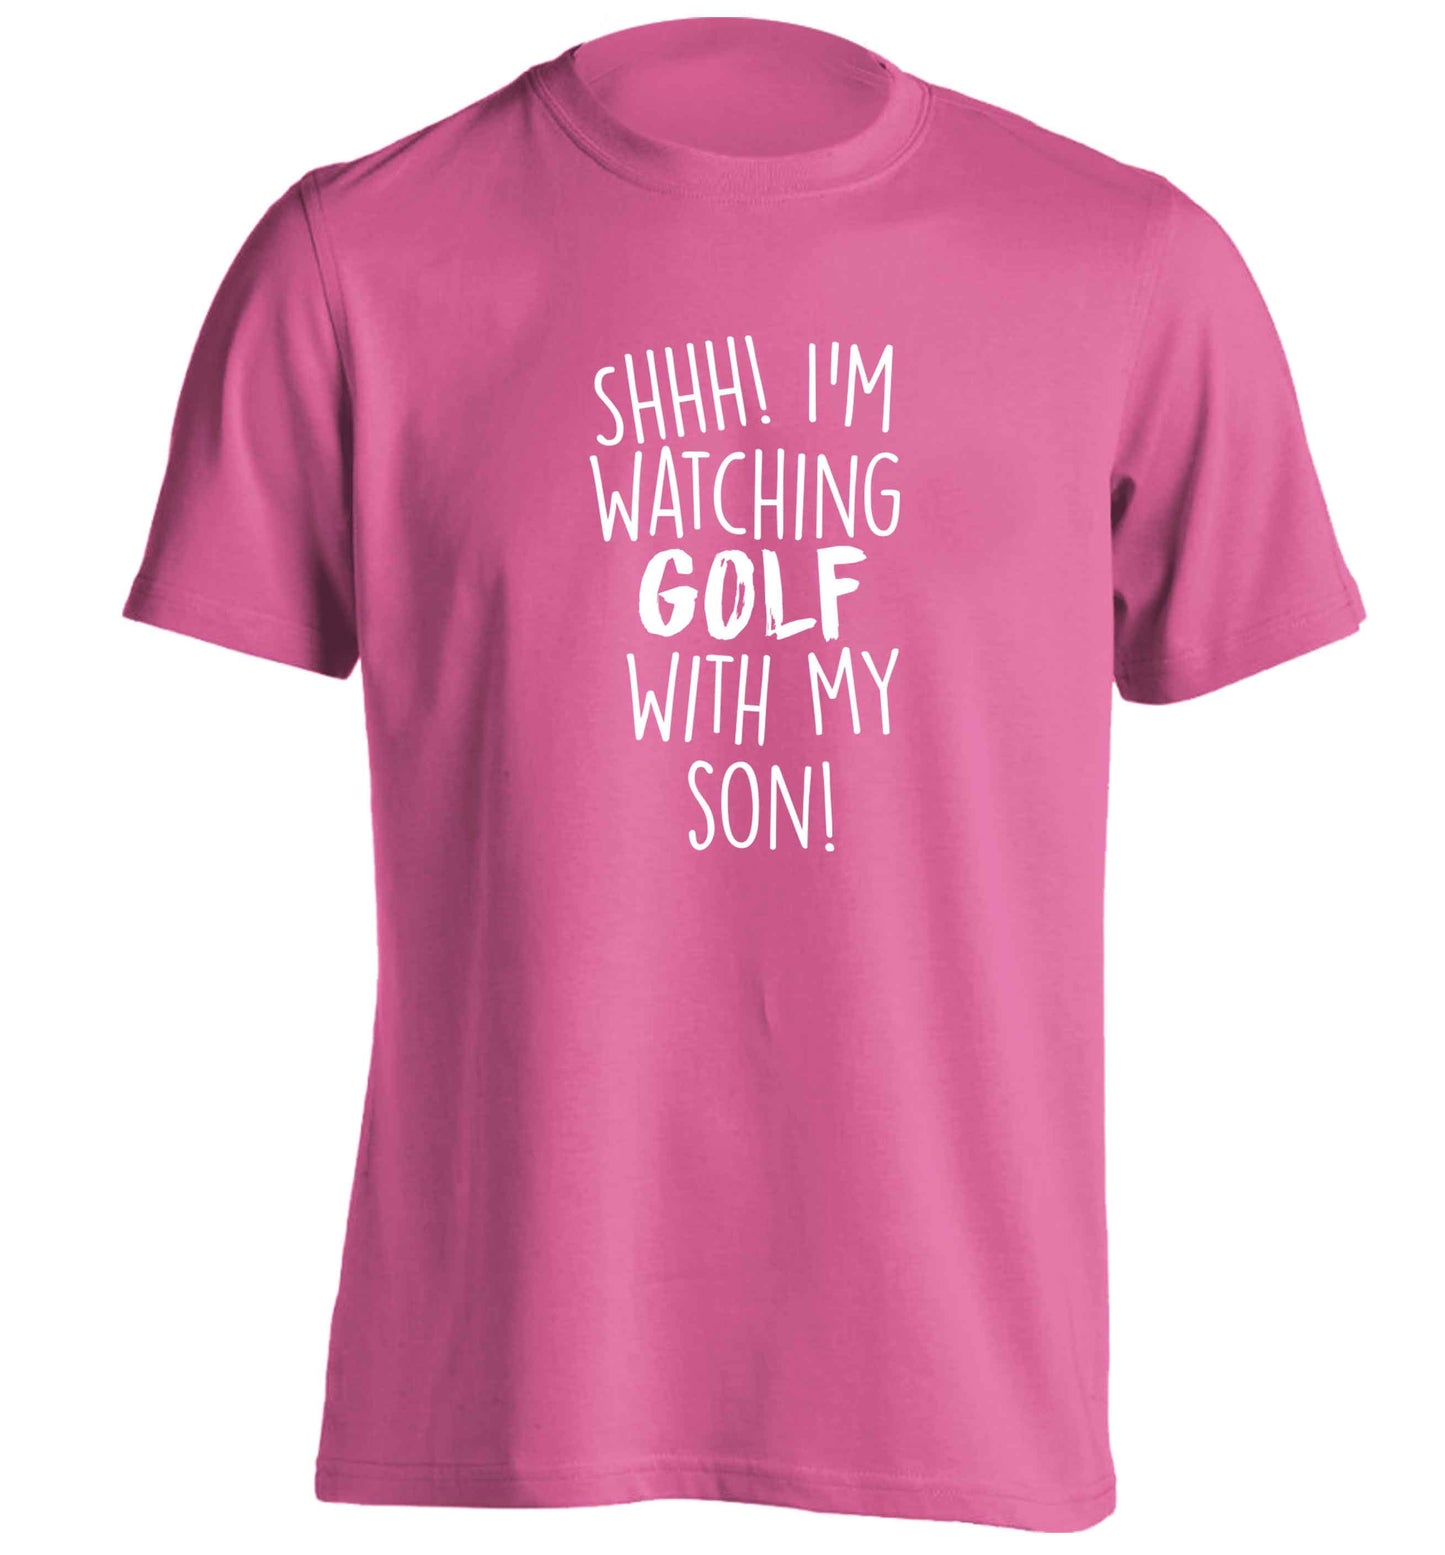 Shh I'm watching golf with my son adults unisex pink Tshirt 2XL